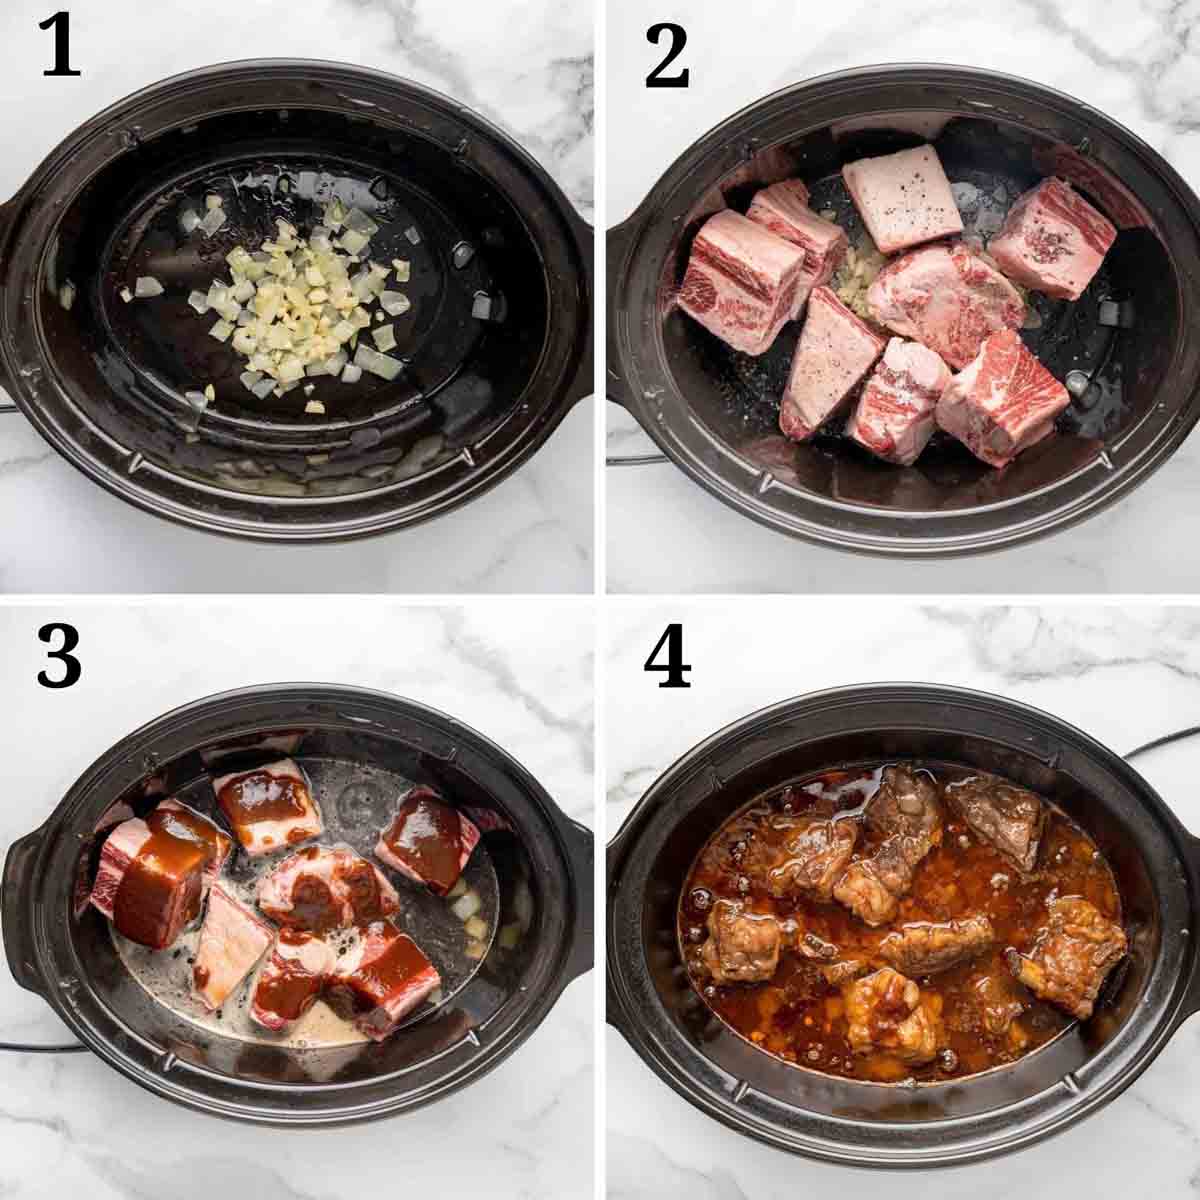 four images showing how to cook guinness beef ribs in a slow cooker